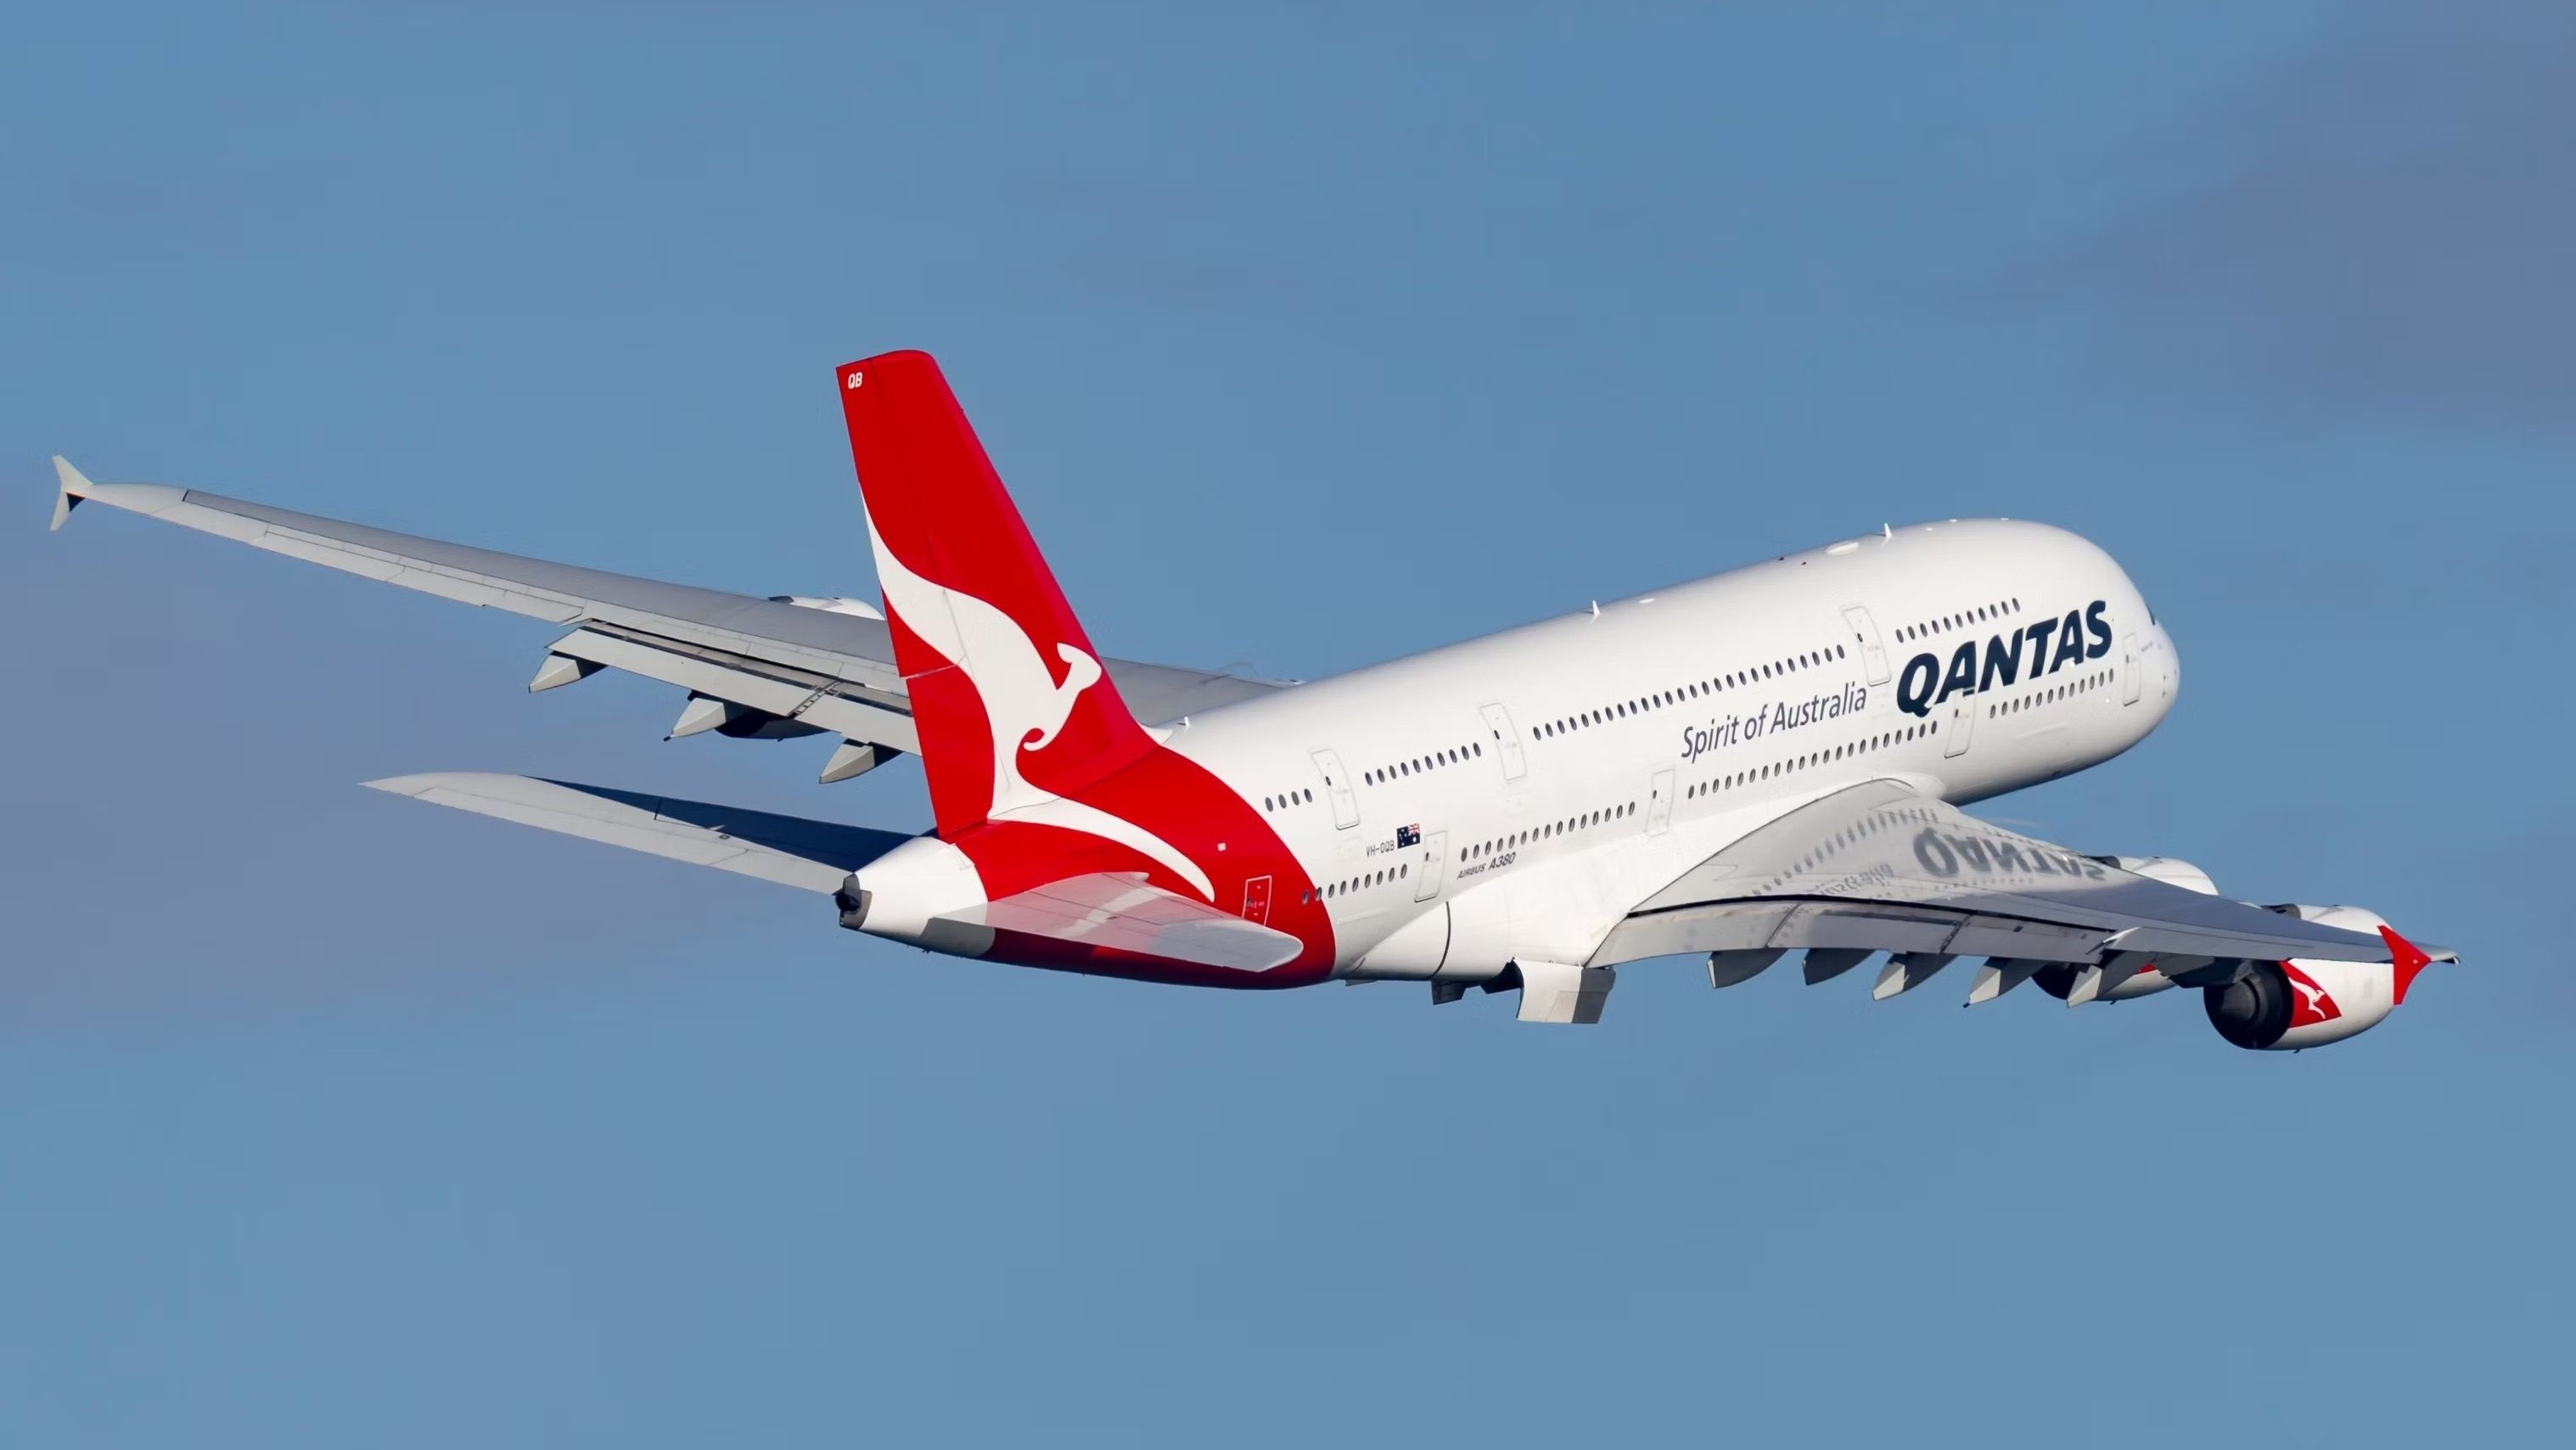 A Qantas A380 flying in the sky.